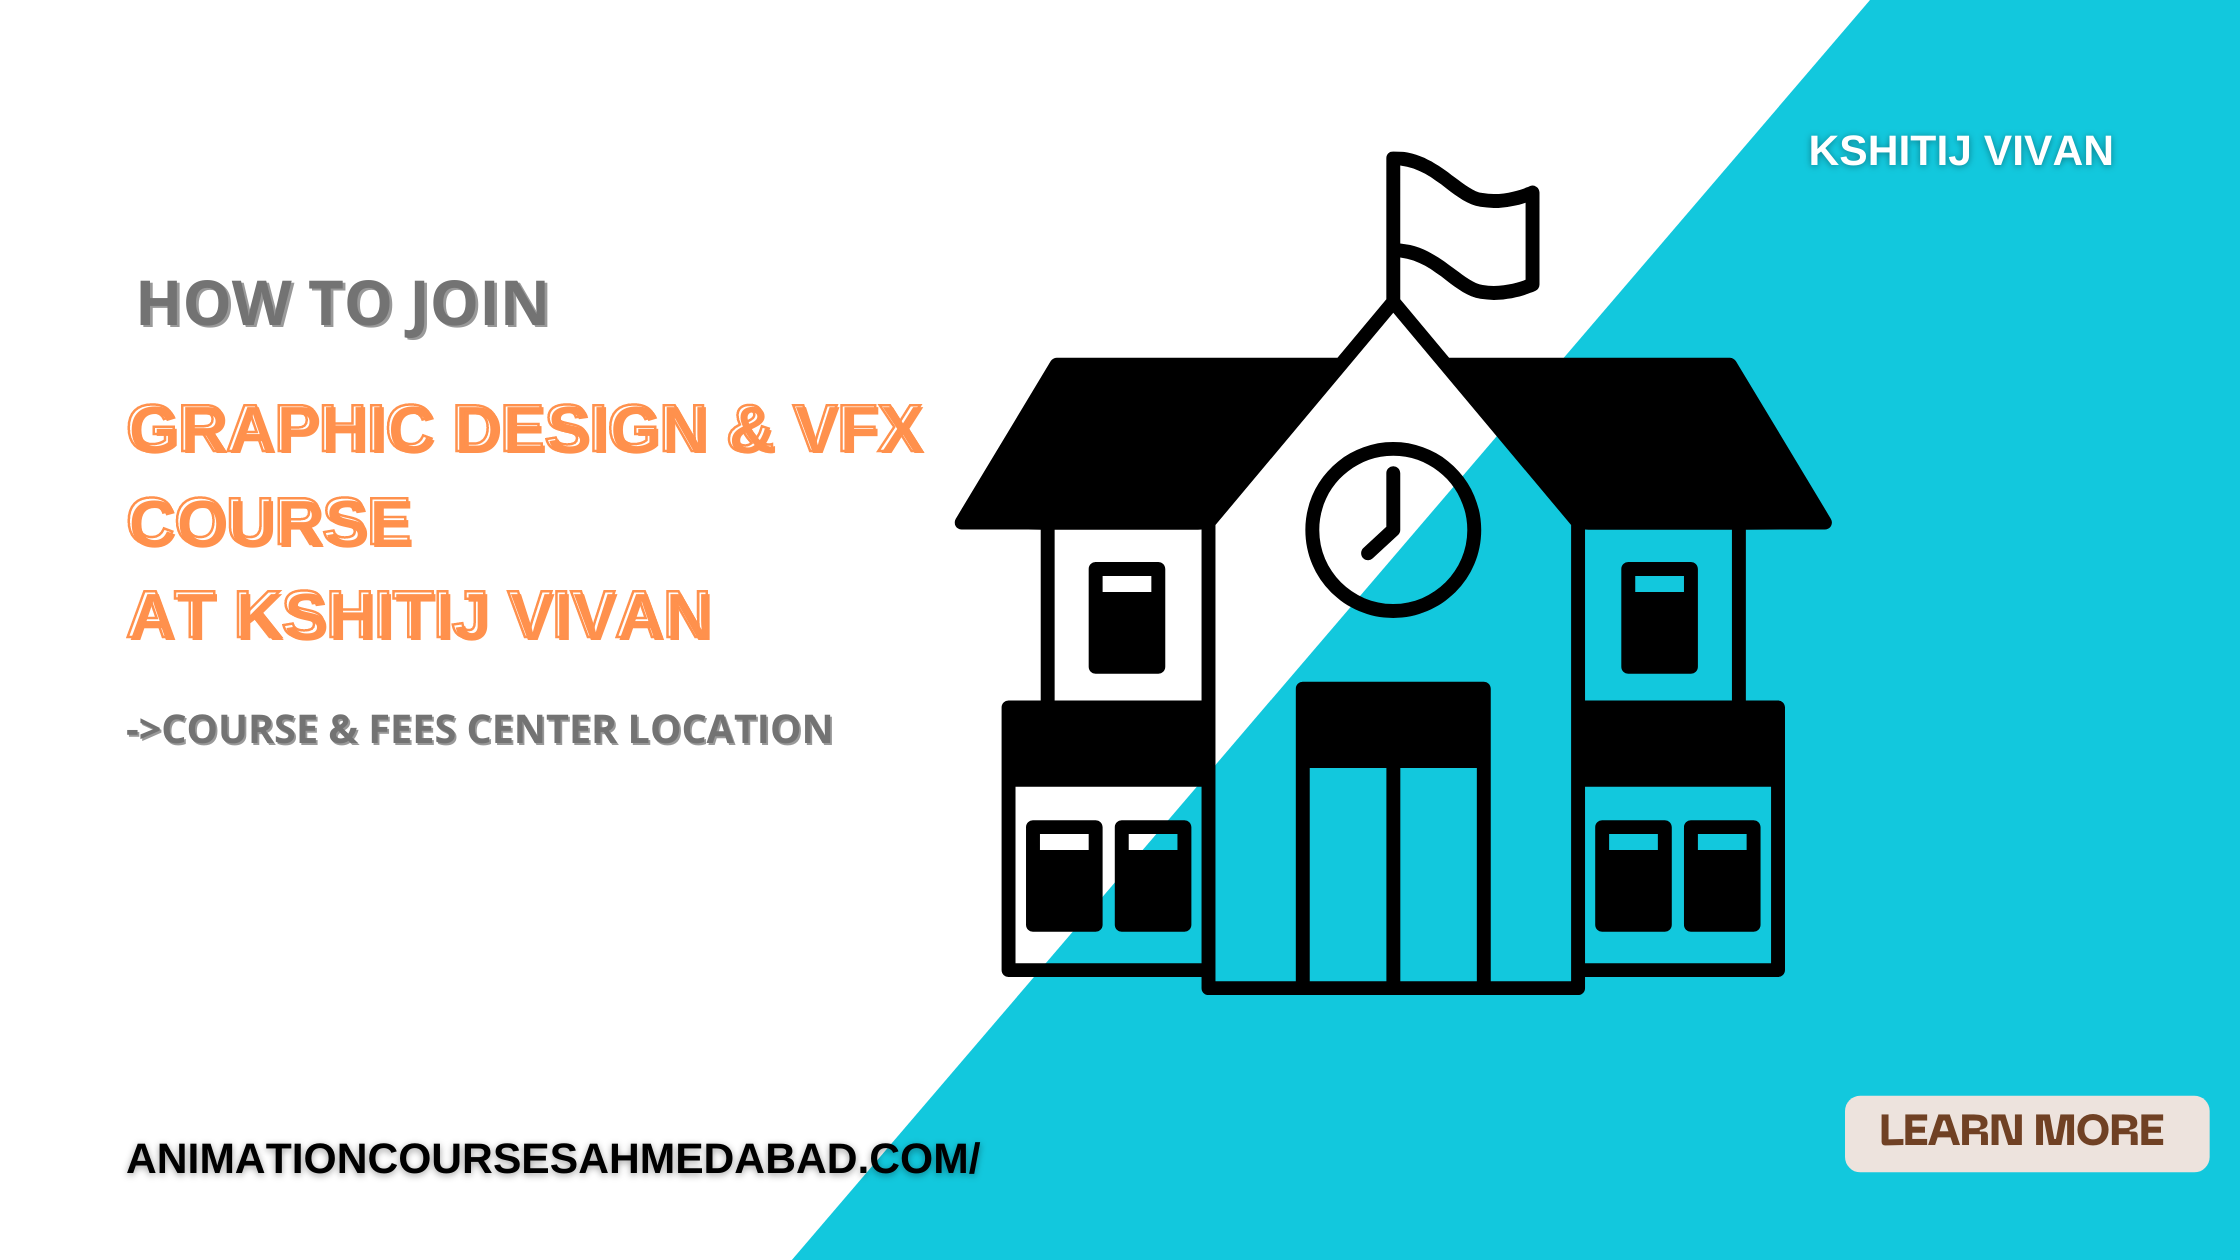 How to join the Graphic design & VFX course at Kshitij Vivan Ahmedabad